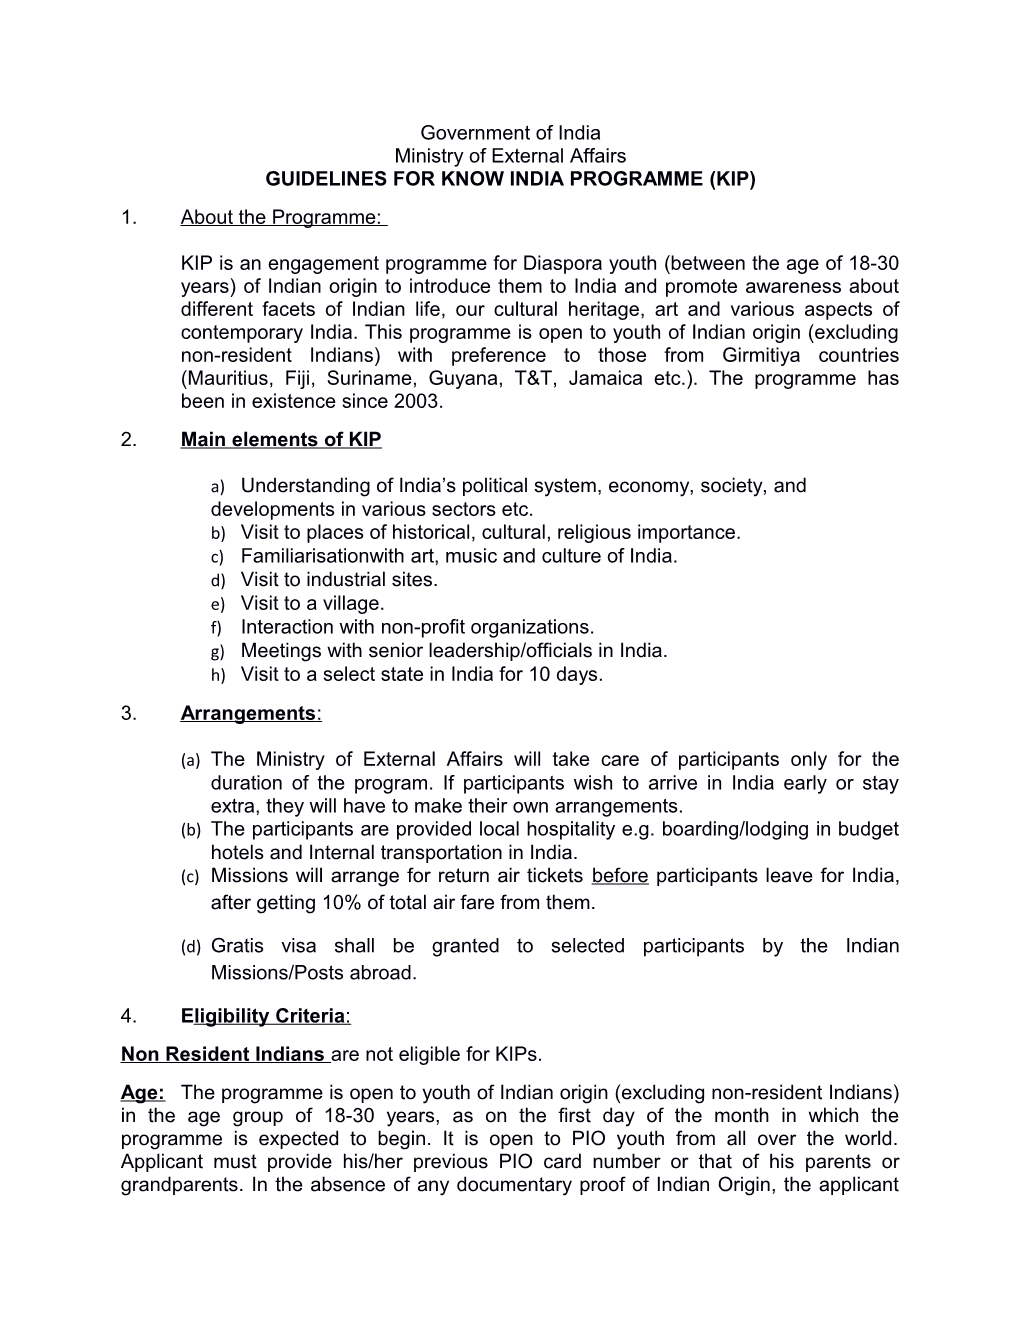 Government of India Ministry of External Affairs GUIDELINES for KNOW INDIA PROGRAMME (KIP)